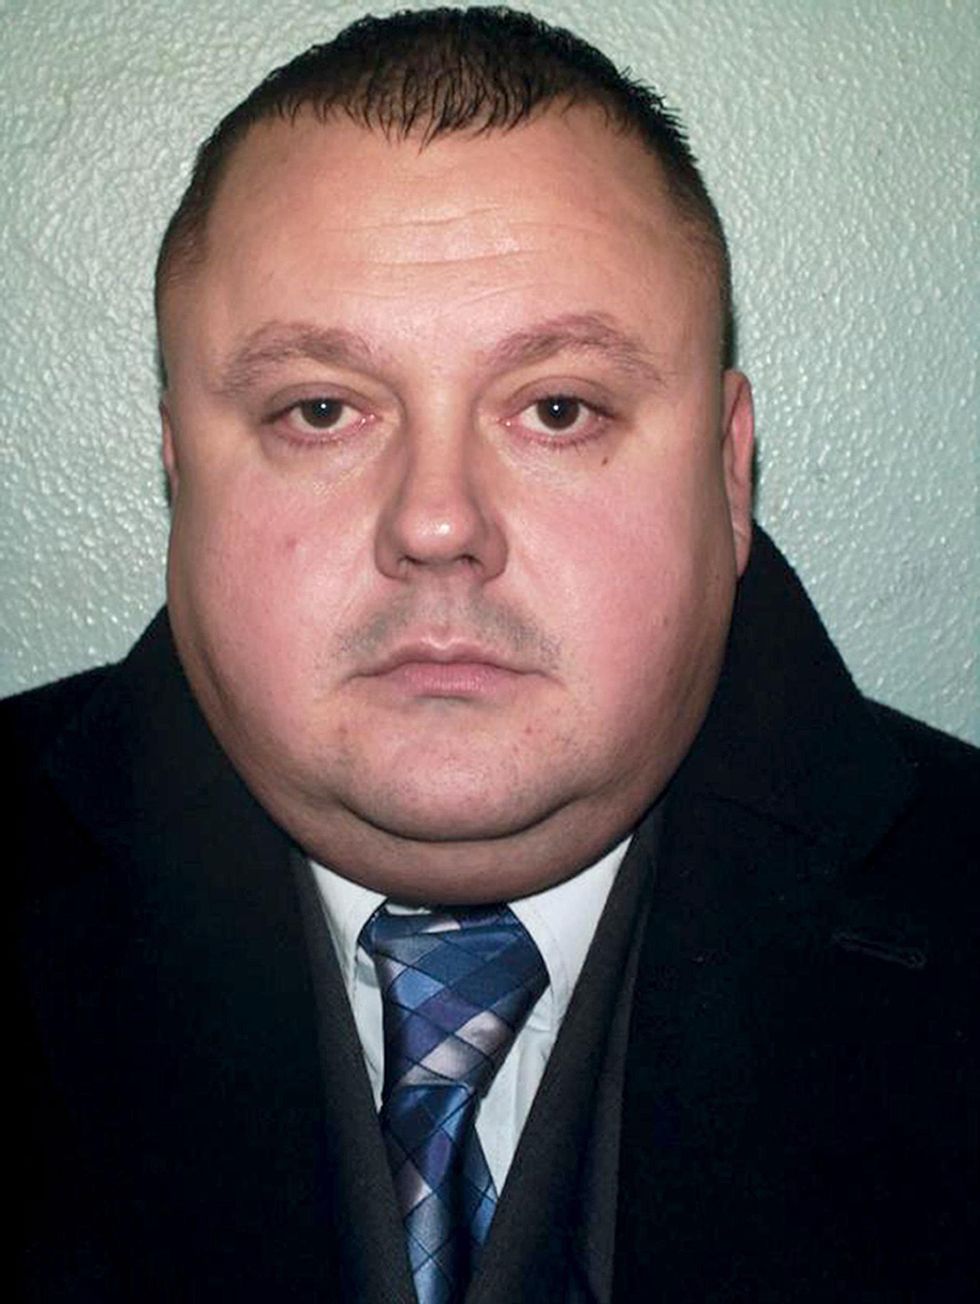 Levi Bellfield to marry girlfriend in prison after winning human rights ...